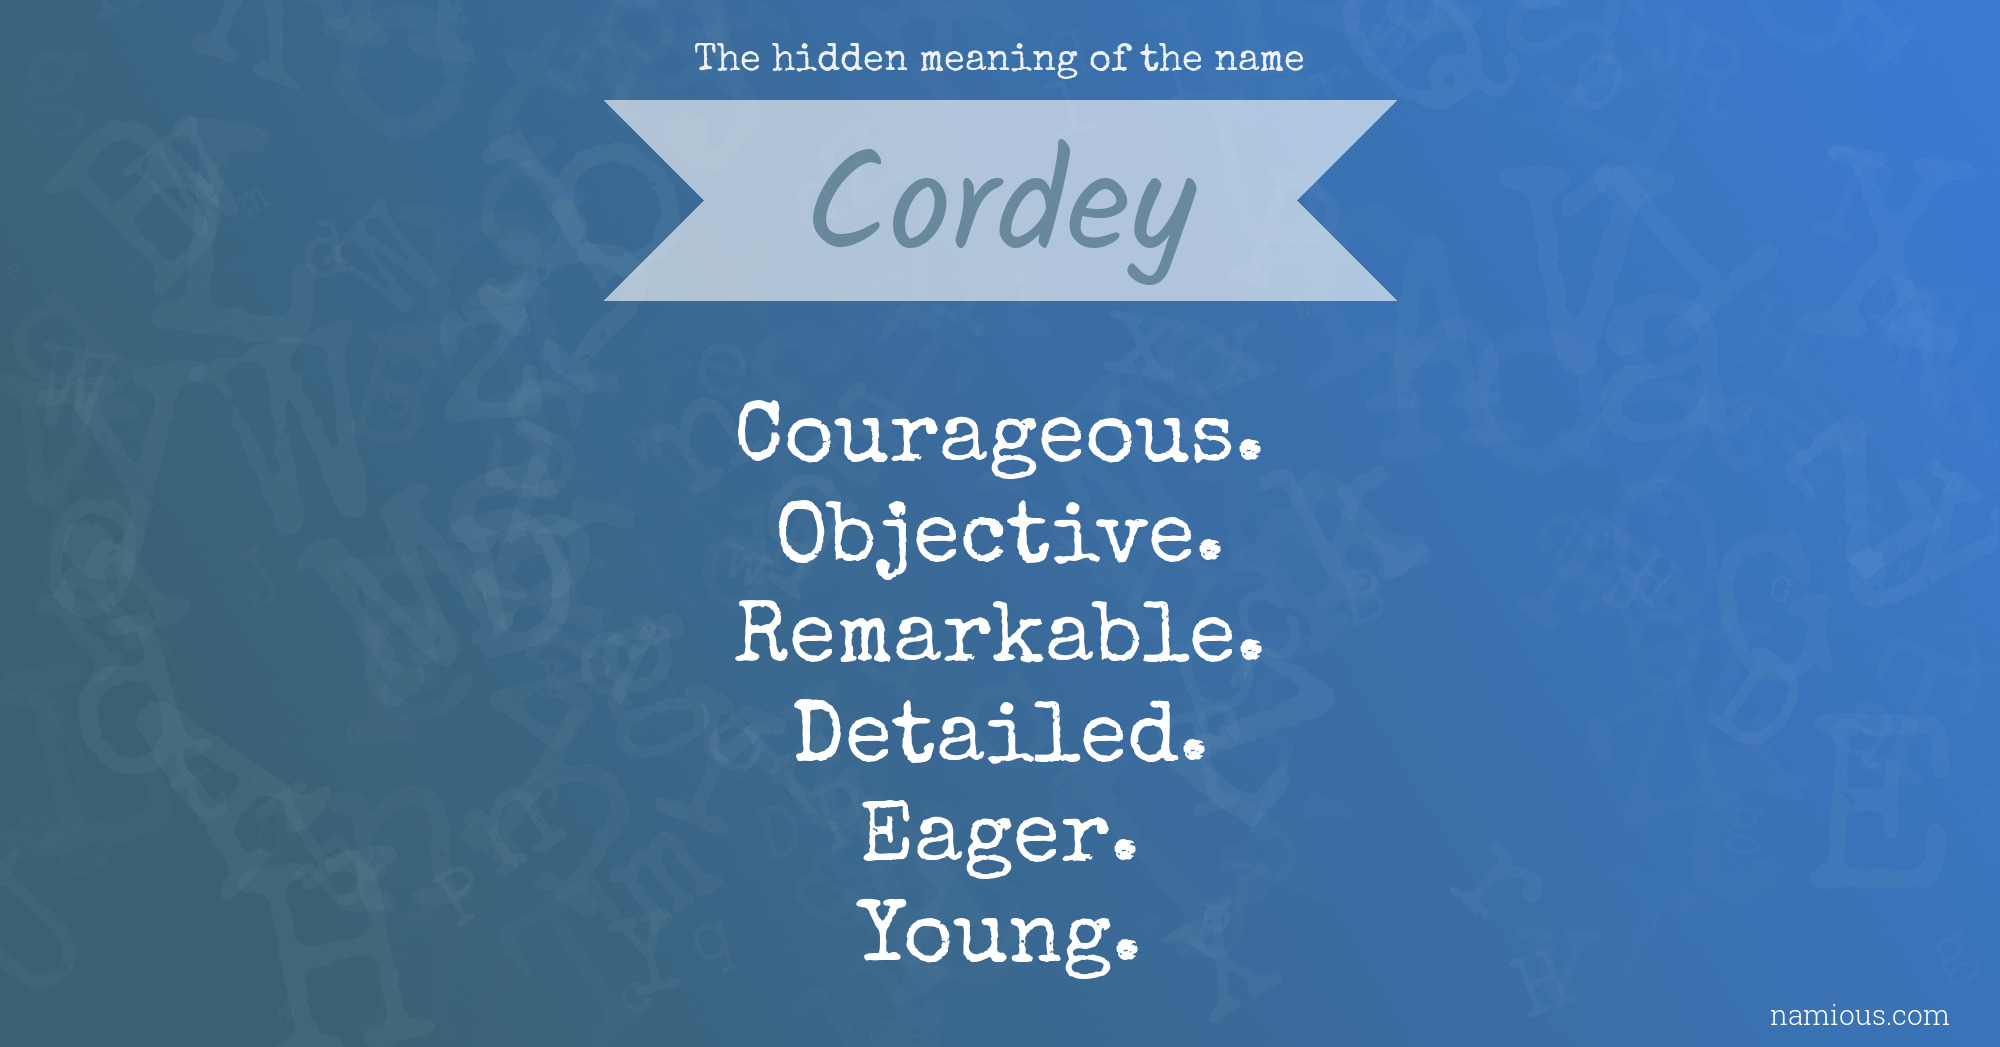 The hidden meaning of the name Cordey